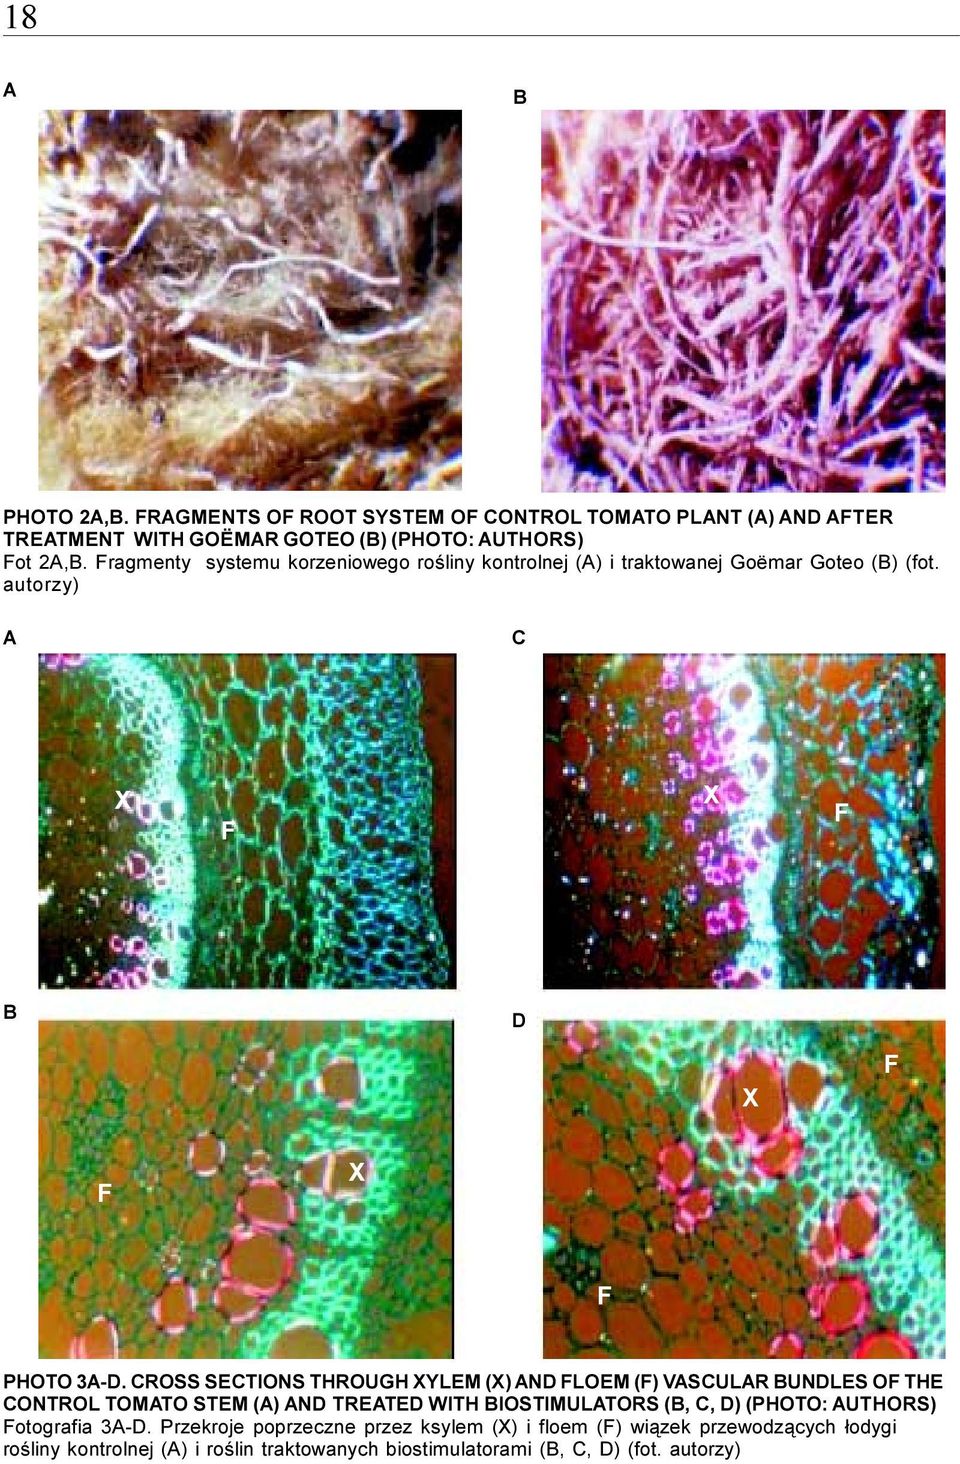 CROSS SECTIONS THROUGH XYLEM (X) AND FLOEM (F) VASCULAR BUNDLES OF THE CONTROL TOMATO STEM (A) AND TREATED WITH BIOSTIMULATORS (B, C, D) (PHOTO: AUTHORS)